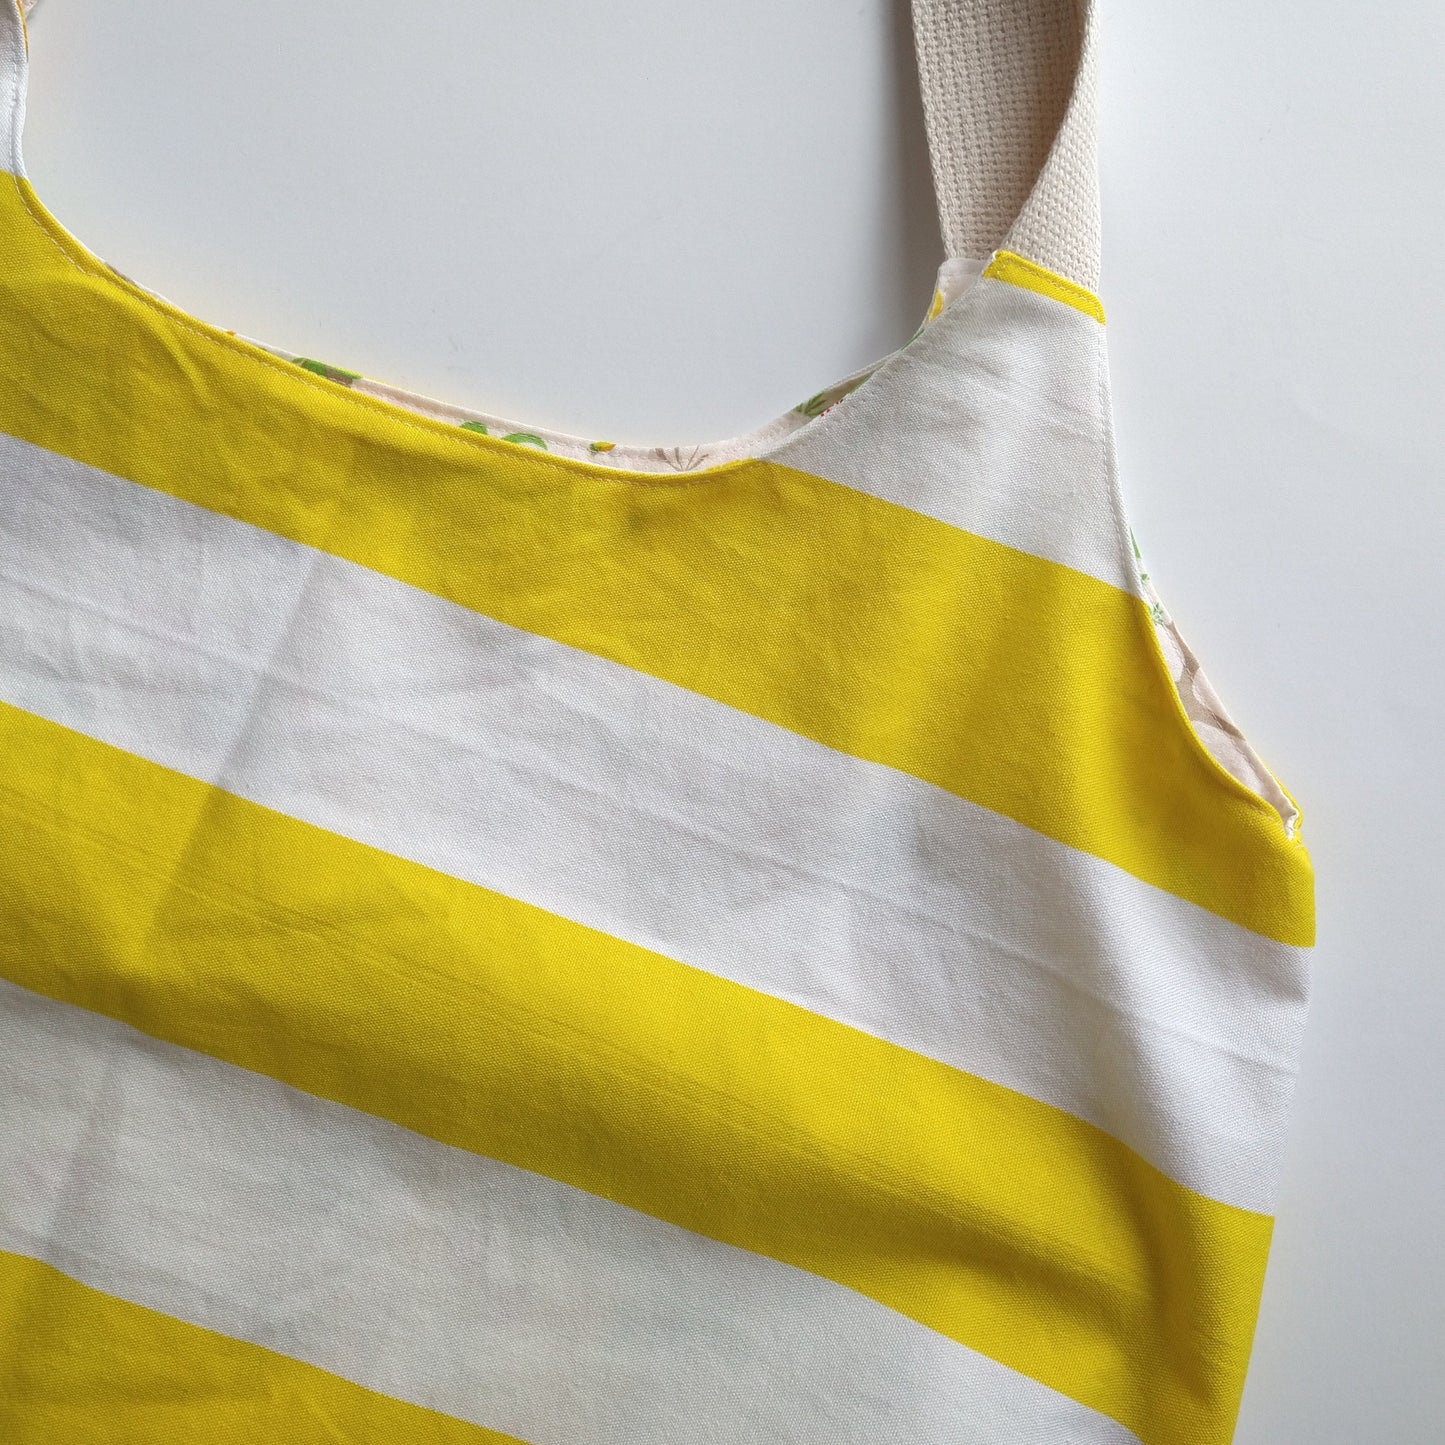 Shopping/beach bag, reversible, size large, yellow stripes jungle (Handmade in Canada)